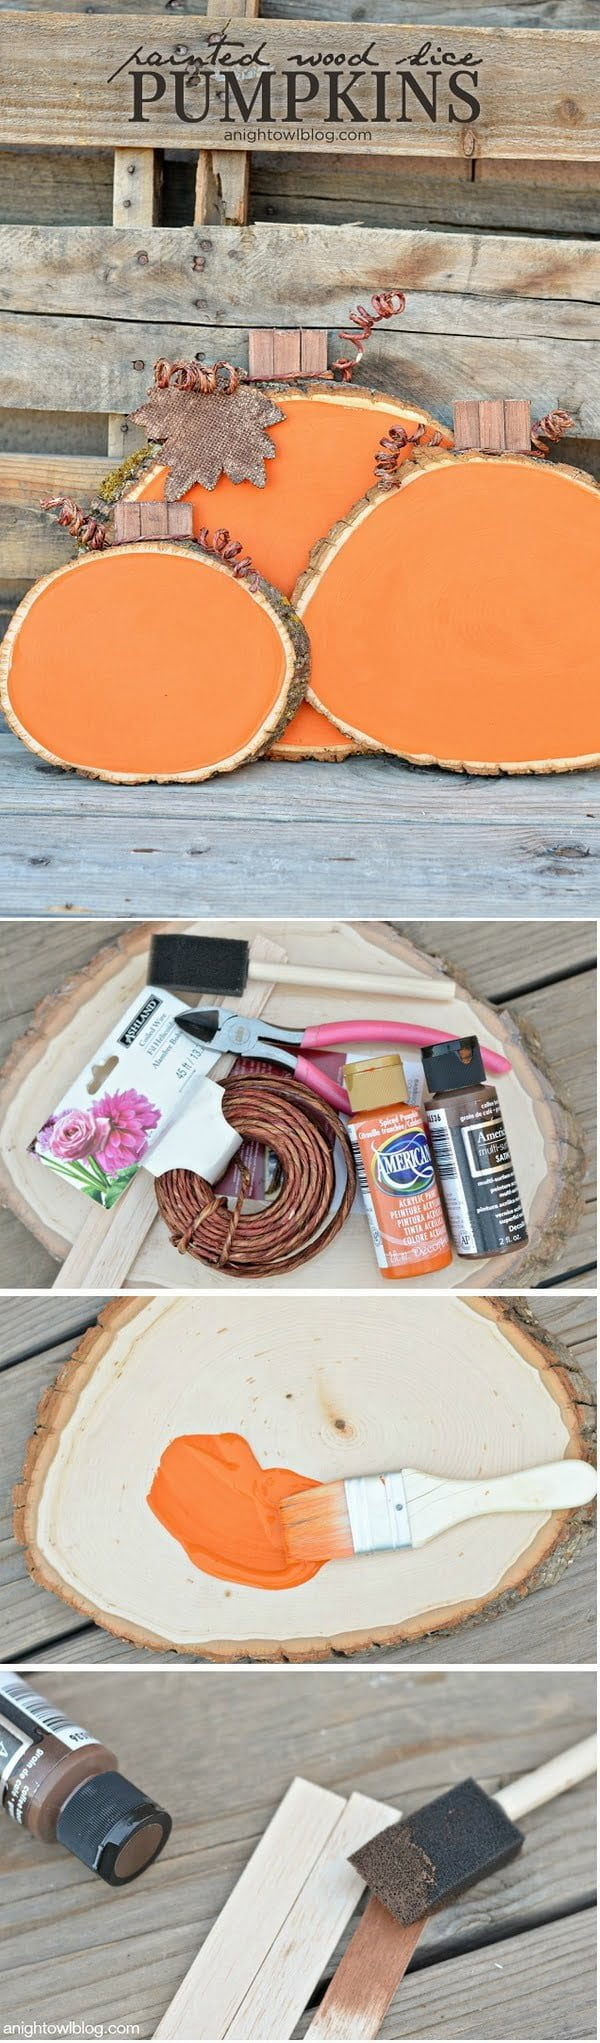 Check out the tutorial how to make DIY wood slice pumpkins for fall decor